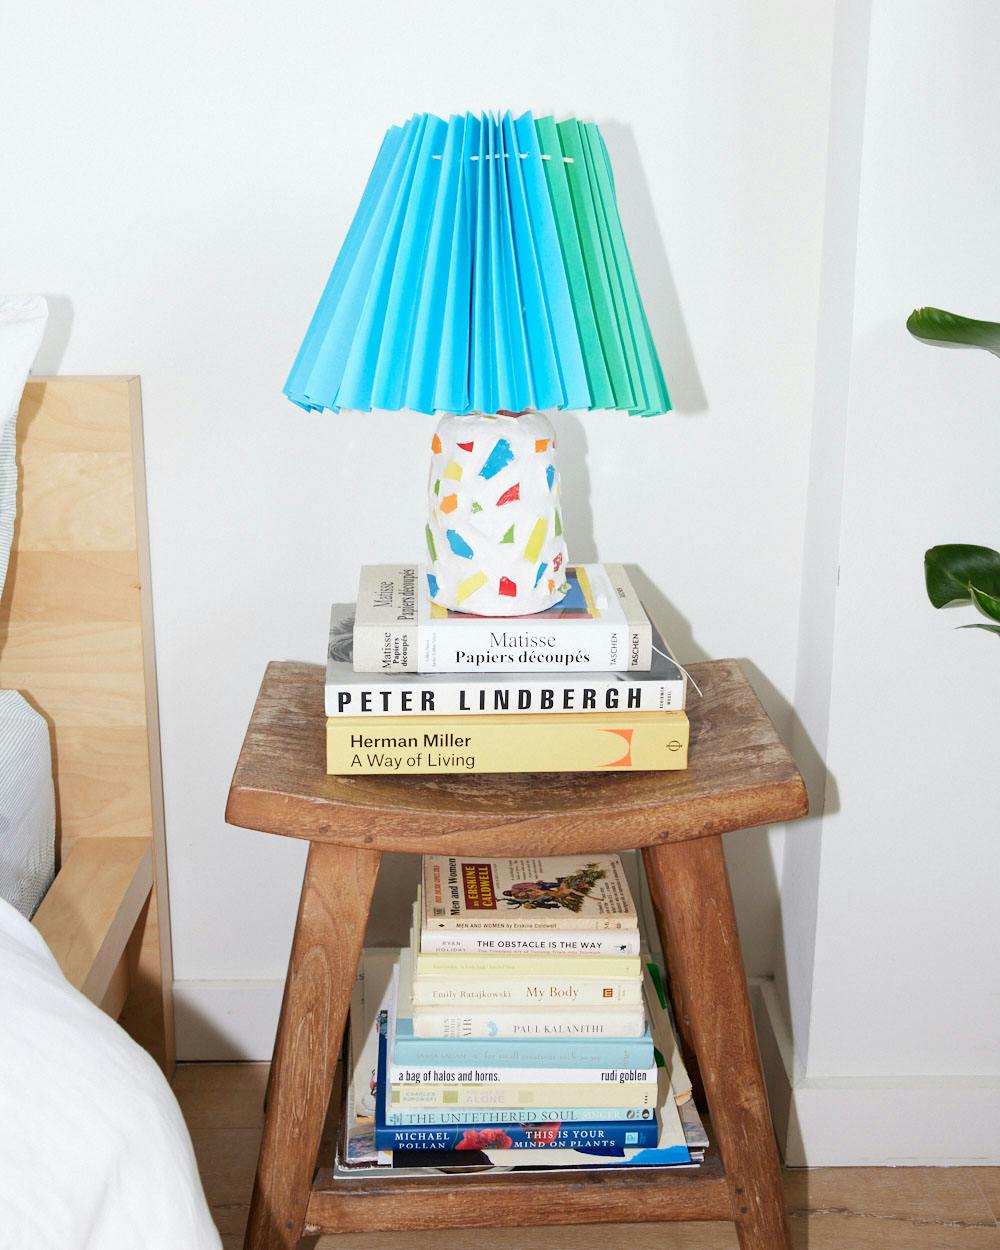 Duda's bedside table, topped with a lamp base and shade she made herself.